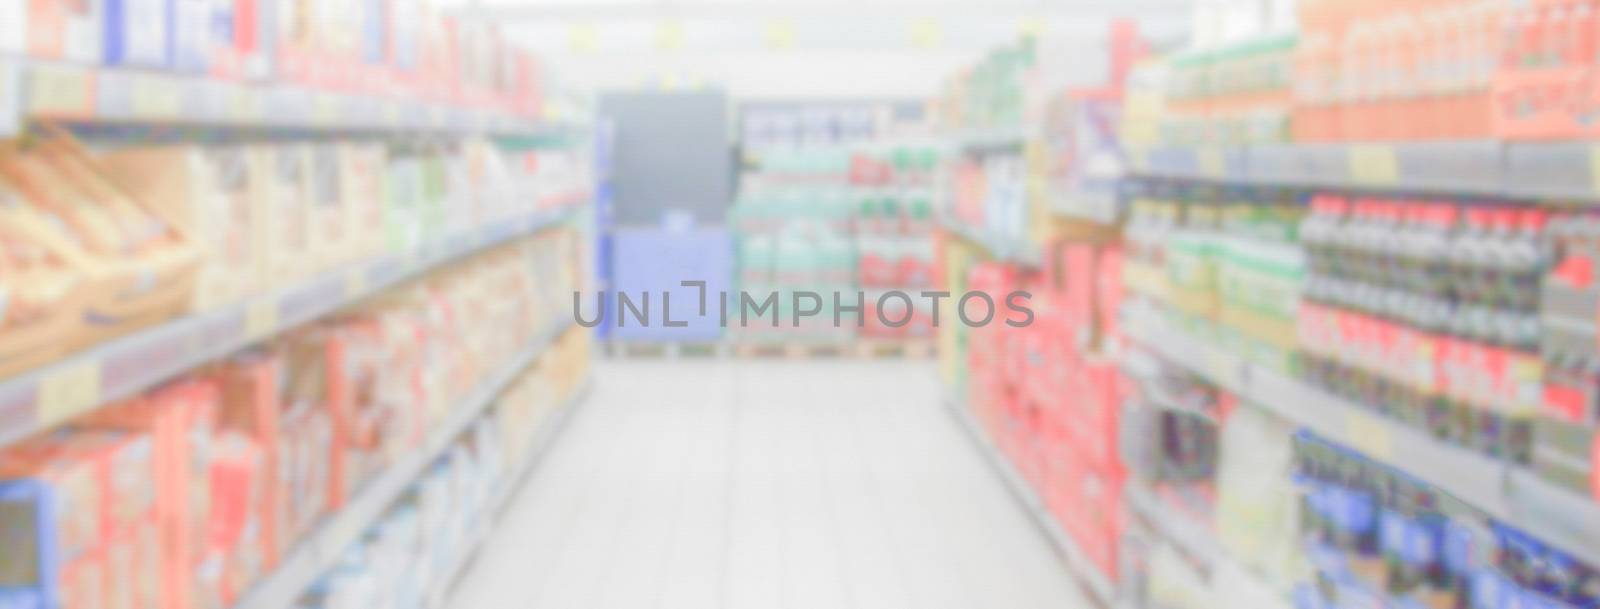 Defocused background within the aisles full of grocery goods in a supermarket or hypermarket convenience store. Intentionally blurred post production for bokeh effect